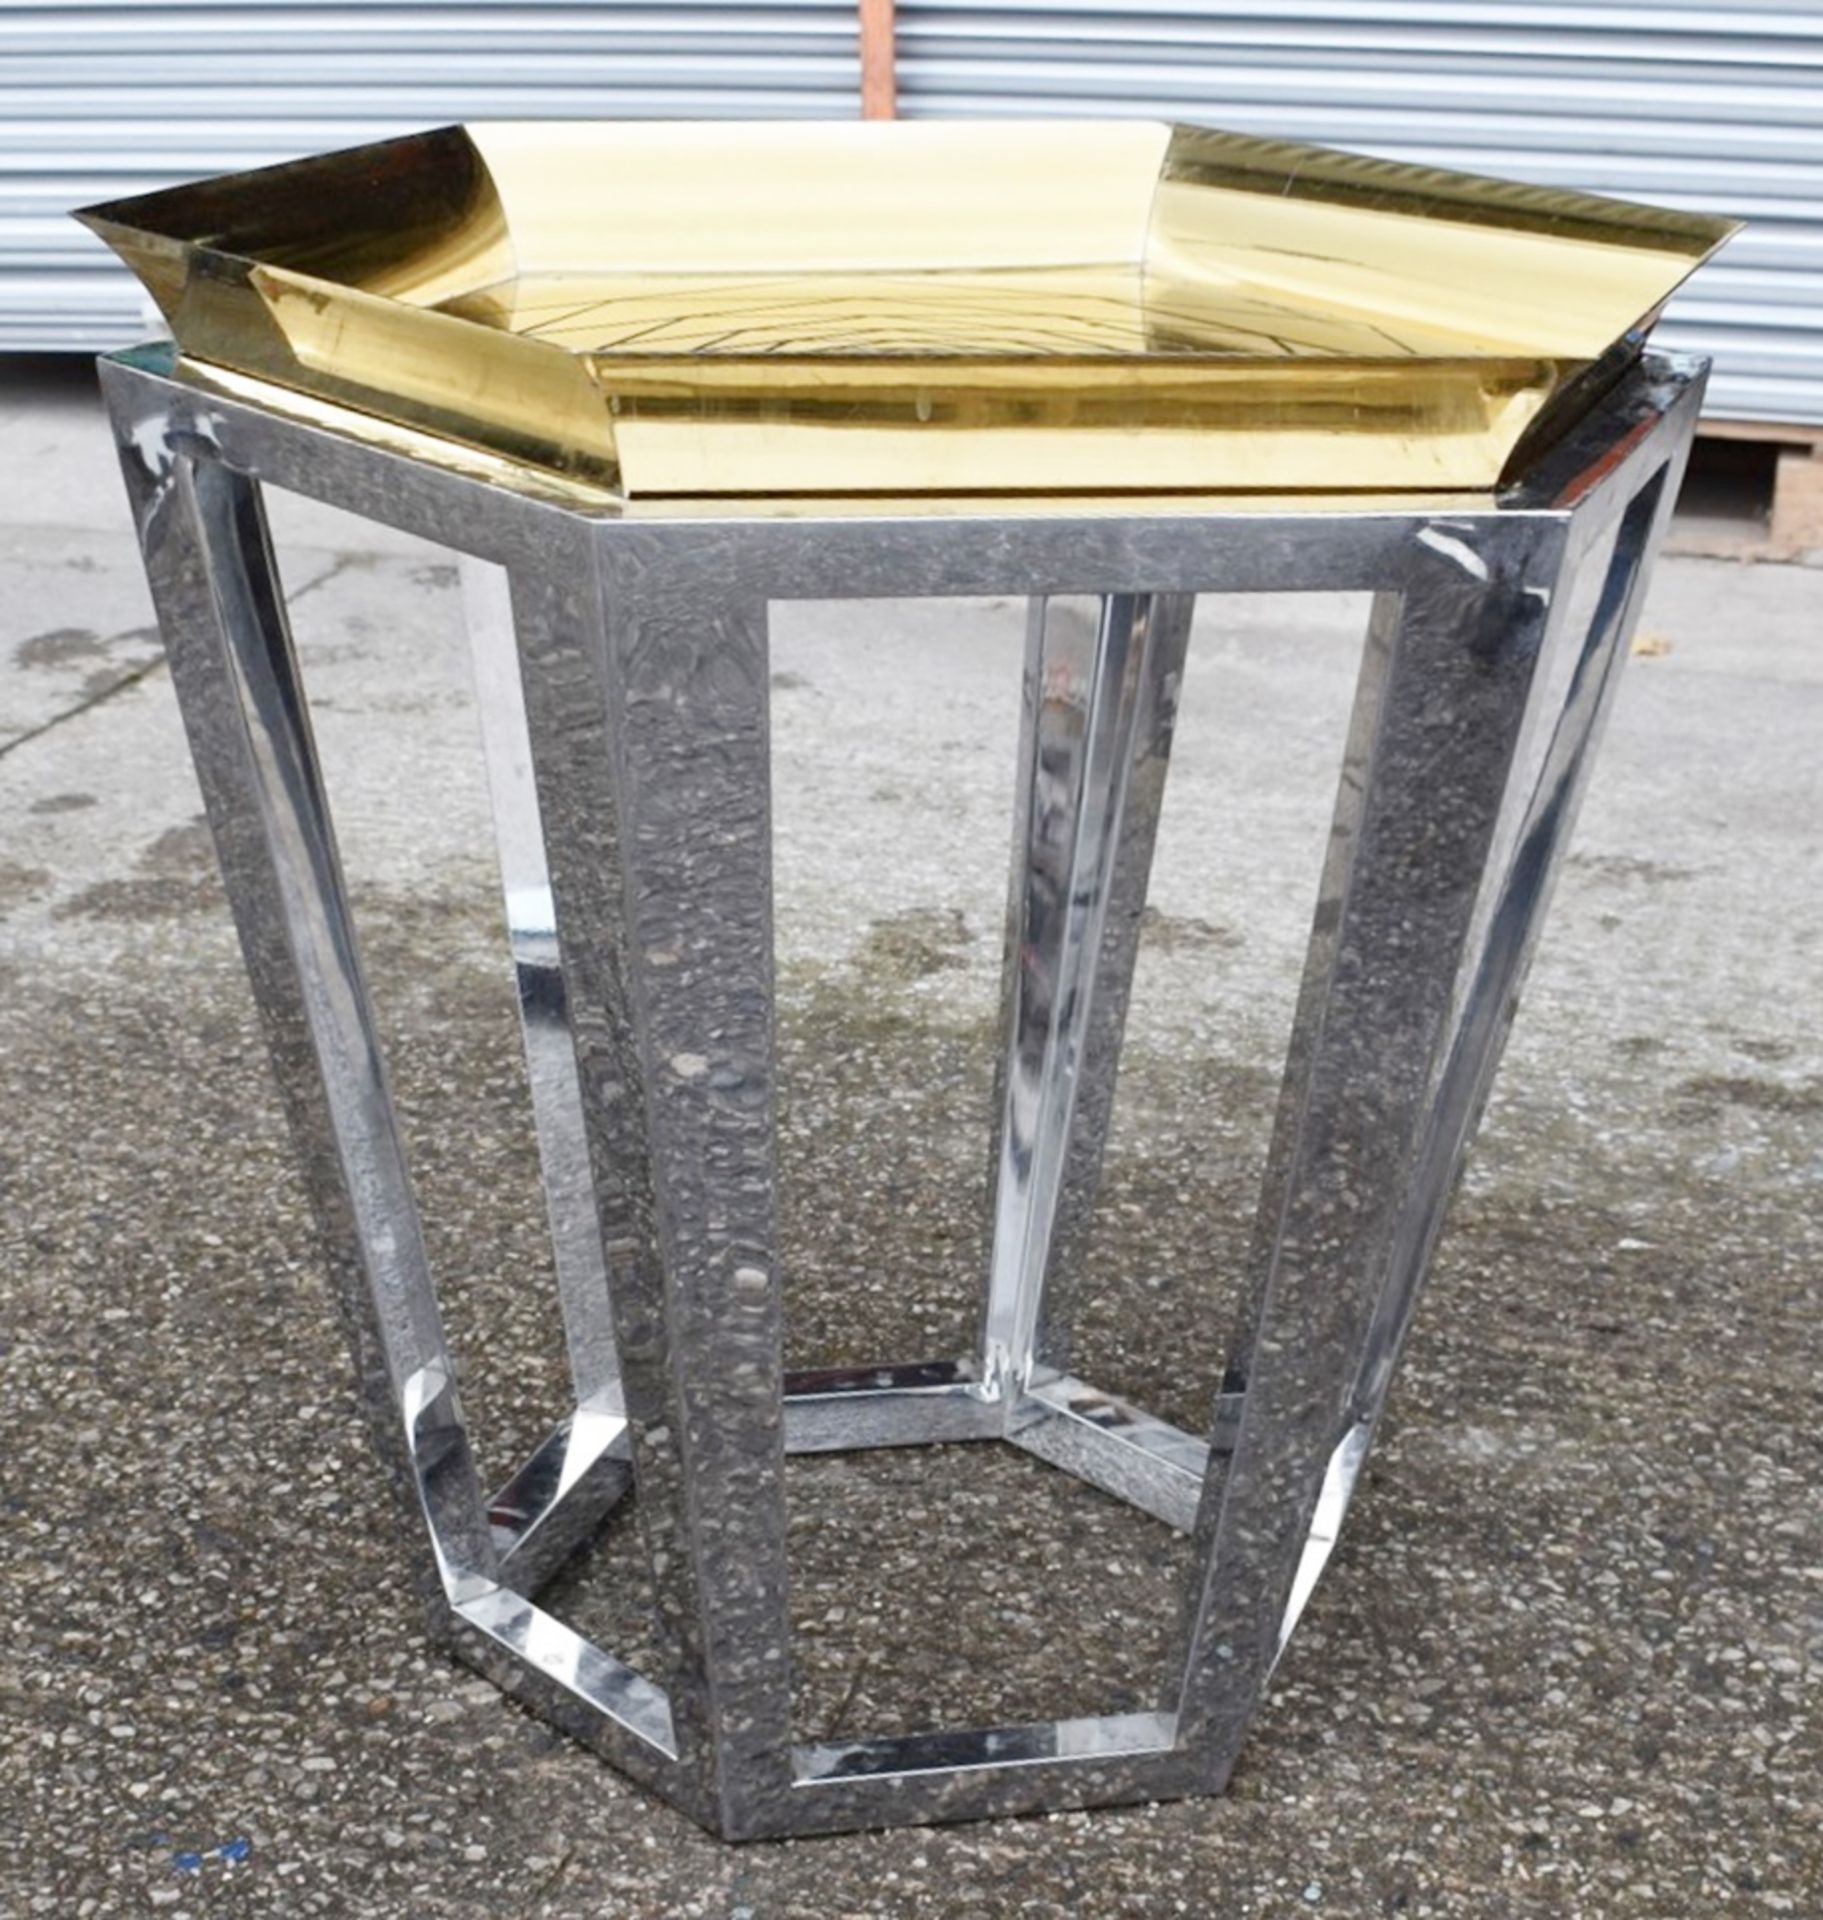 1 x Contemporary Designer Metal Table Featuring a Removable Tray Top with Geometric Rose Design, - Image 2 of 4